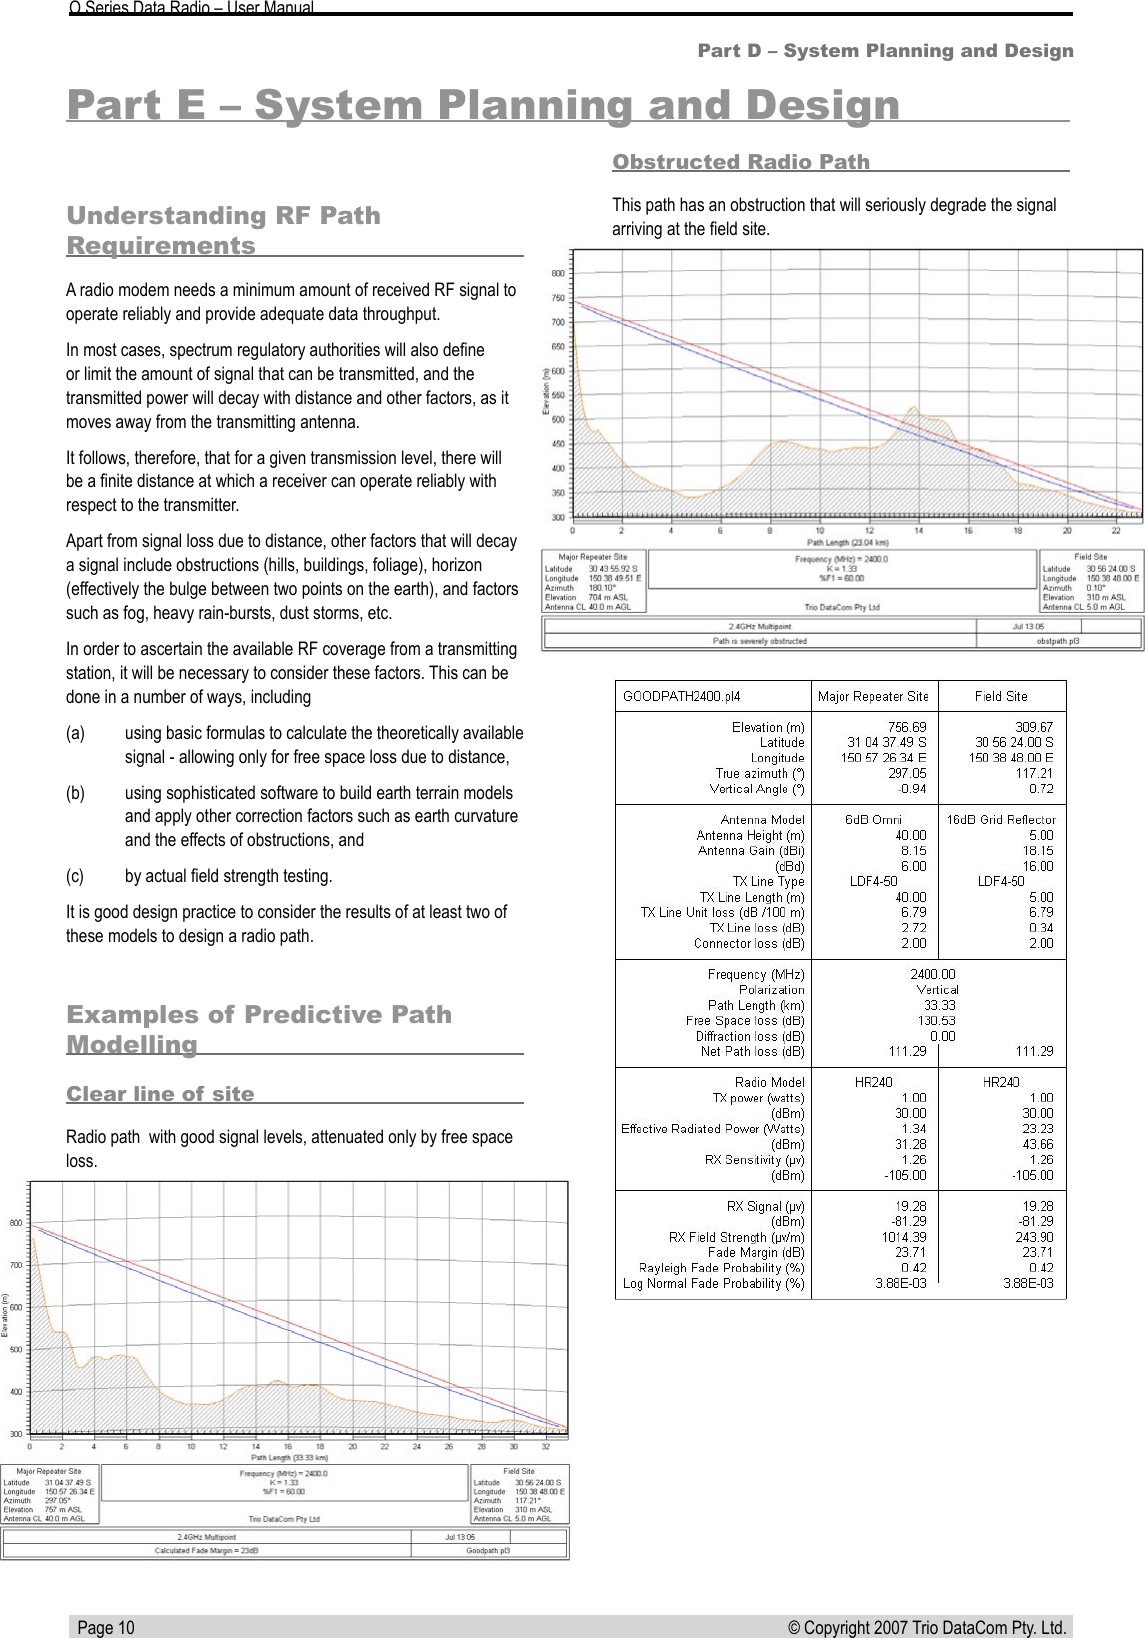   Page 10 © Copyright 2007 Trio DataCom Pty. Ltd. O Series Data Radio – User ManualPart D – System Planning and DesignPart E – System Planning and DesignUnderstanding RF Path RequirementsA radio modem needs a minimum amount of received RF signal to operate reliably and provide adequate data throughput.In most cases, spectrum regulatory authorities will also deﬁne or limit the amount of signal that can be transmitted, and the transmitted power will decay with distance and other factors, as it moves away from the transmitting antenna.It follows, therefore, that for a given transmission level, there will be a ﬁnite distance at which a receiver can operate reliably with respect to the transmitter.Apart from signal loss due to distance, other factors that will decay a signal include obstructions (hills, buildings, foliage), horizon (effectively the bulge between two points on the earth), and factors such as fog, heavy rain-bursts, dust storms, etc.In order to ascertain the available RF coverage from a transmitting station, it will be necessary to consider these factors. This can be done in a number of ways, including (a)  using basic formulas to calculate the theoretically available signal - allowing only for free space loss due to distance, (b)  using sophisticated software to build earth terrain models and apply other correction factors such as earth curvature and the effects of obstructions, and (c)  by actual ﬁeld strength testing. It is good design practice to consider the results of at least two of these models to design a radio path.Examples of Predictive Path ModellingClear line of siteRadio path  with good signal levels, attenuated only by free space loss.Obstructed Radio PathThis path has an obstruction that will seriously degrade the signal arriving at the ﬁeld site.